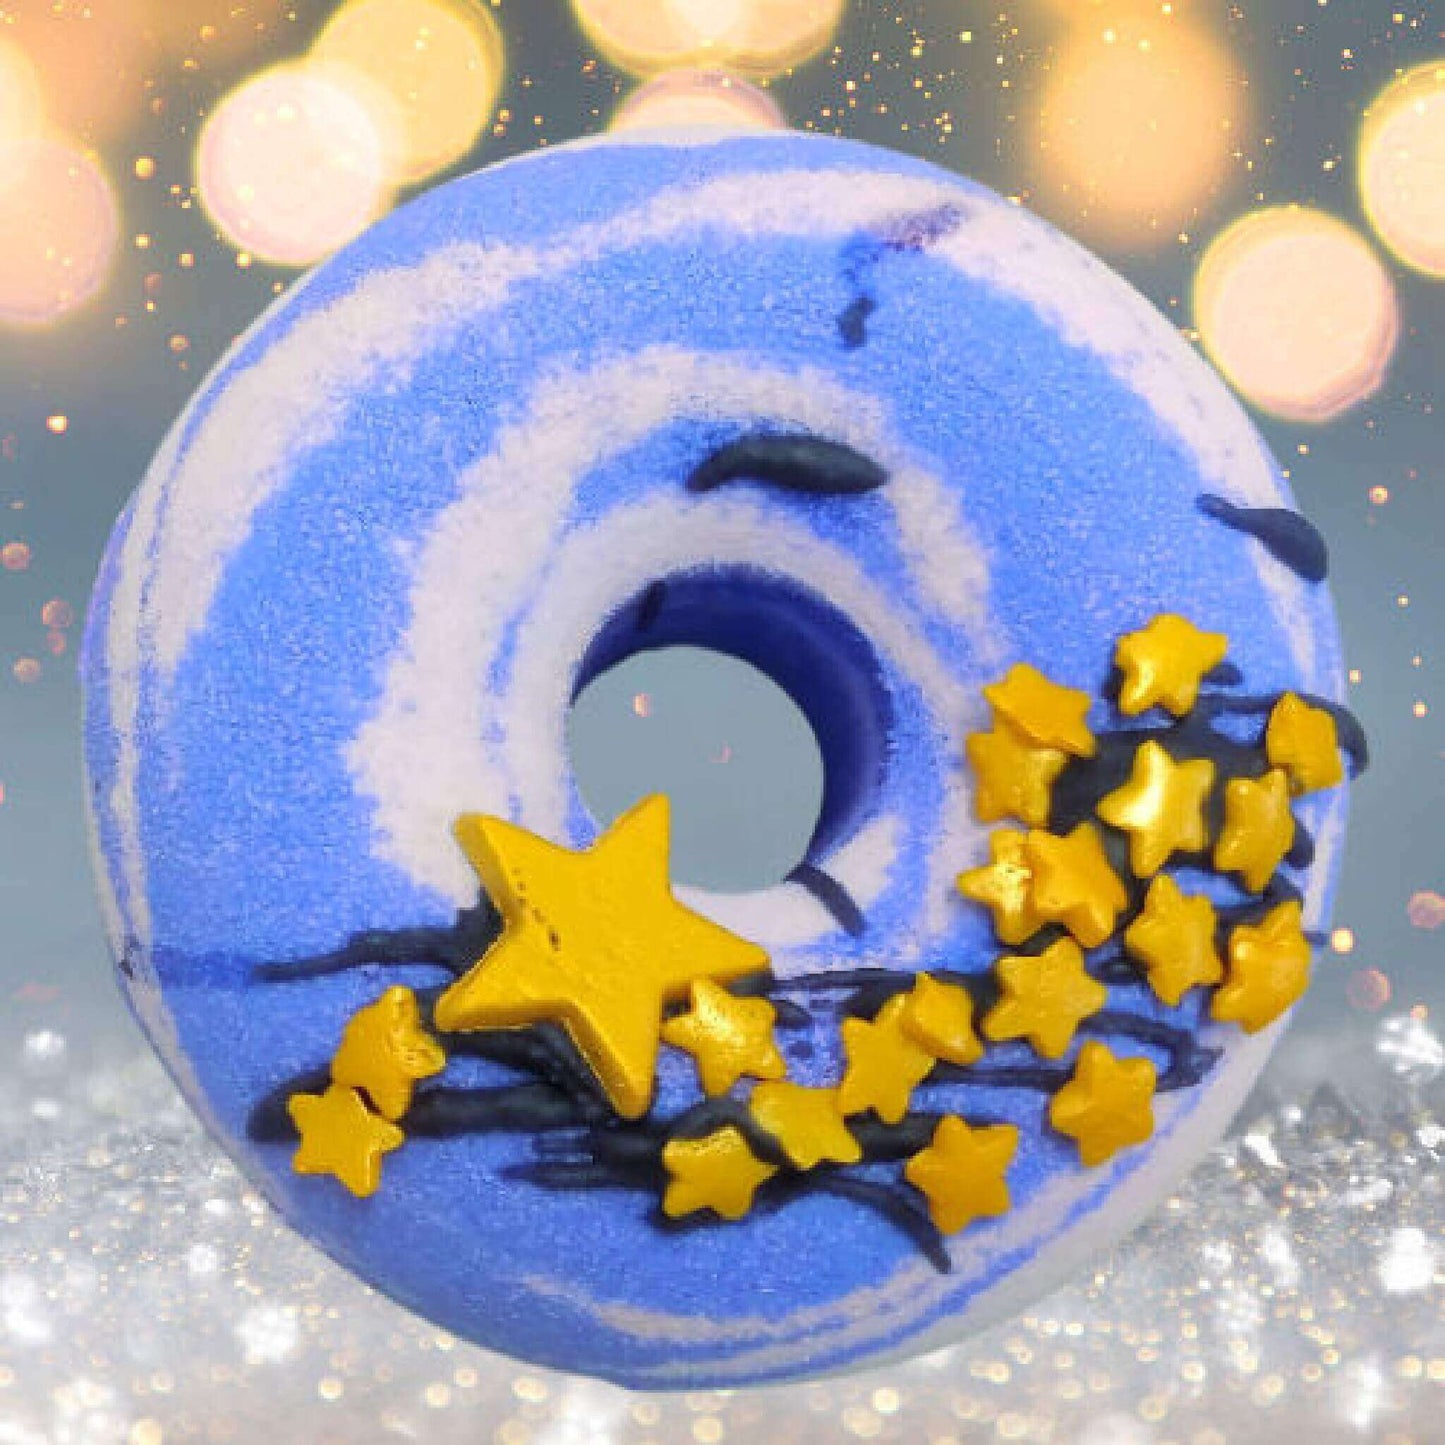 Experience bliss with our Stargazer Donut Fizzy Bath Bomb. It's more than a bath, it's a stargazing journey!